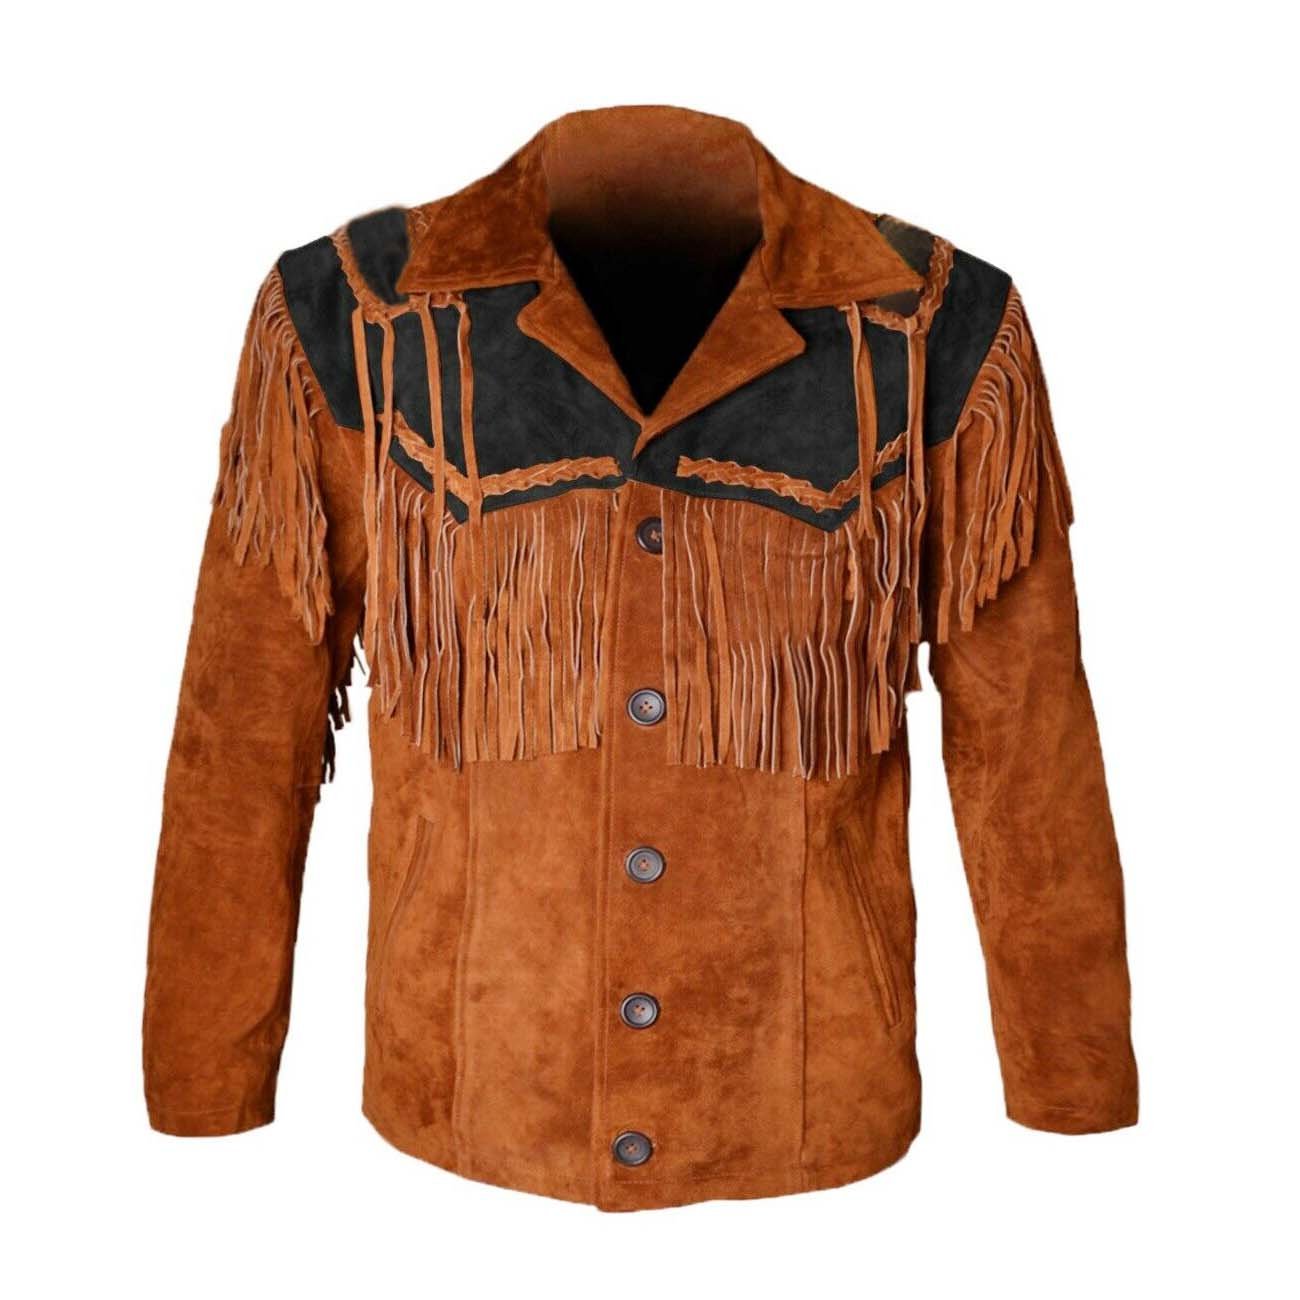 WESTERN COW BOY JACKET TAN BROWN AND BLACK SUEDE LEATHER MEN WITH ...